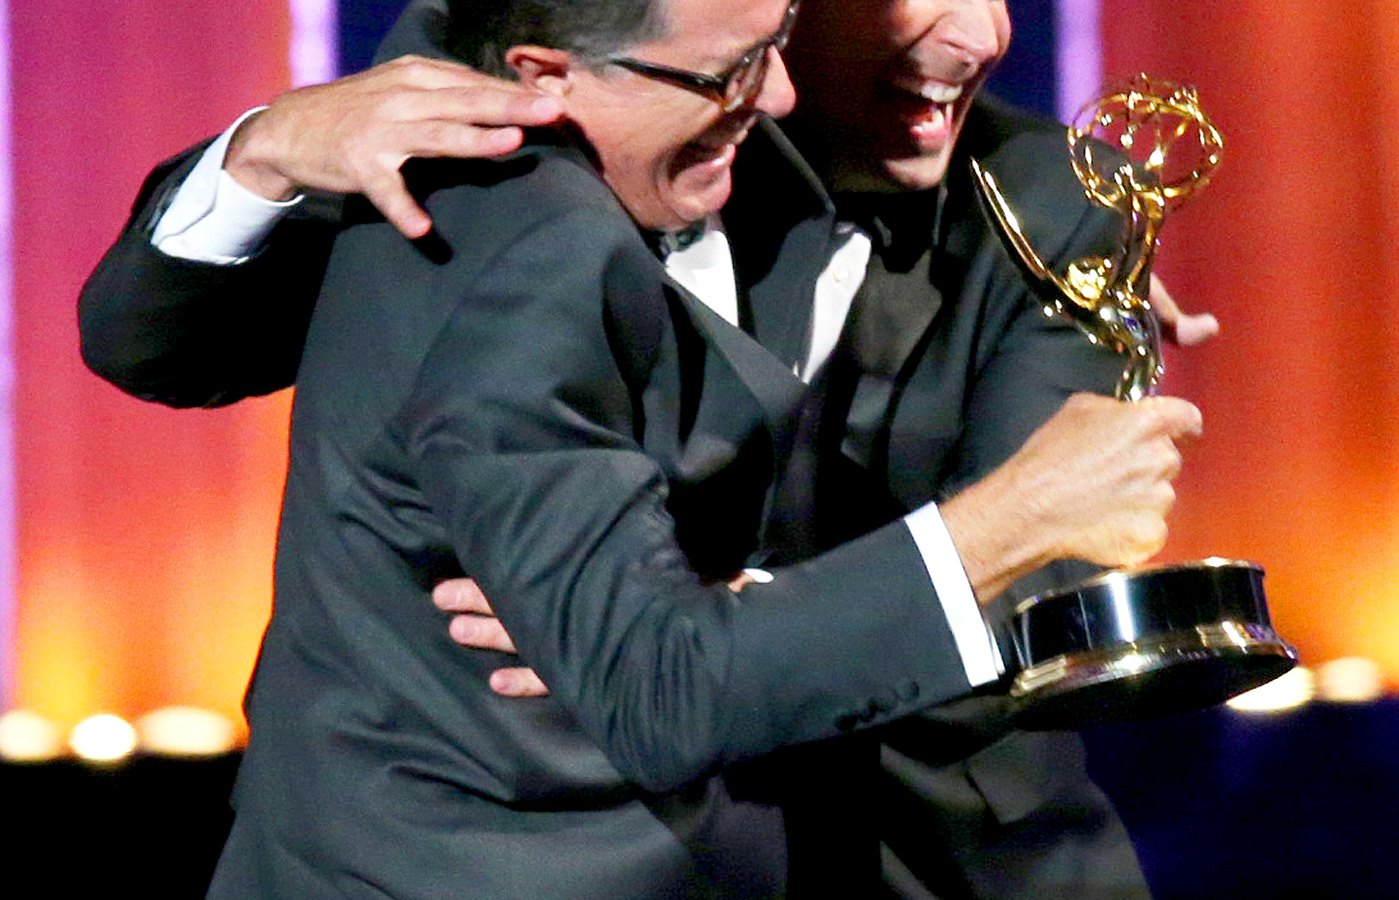 Stephen Colbert and Jimmy Fallon on stage during the 66th Emmy Awards